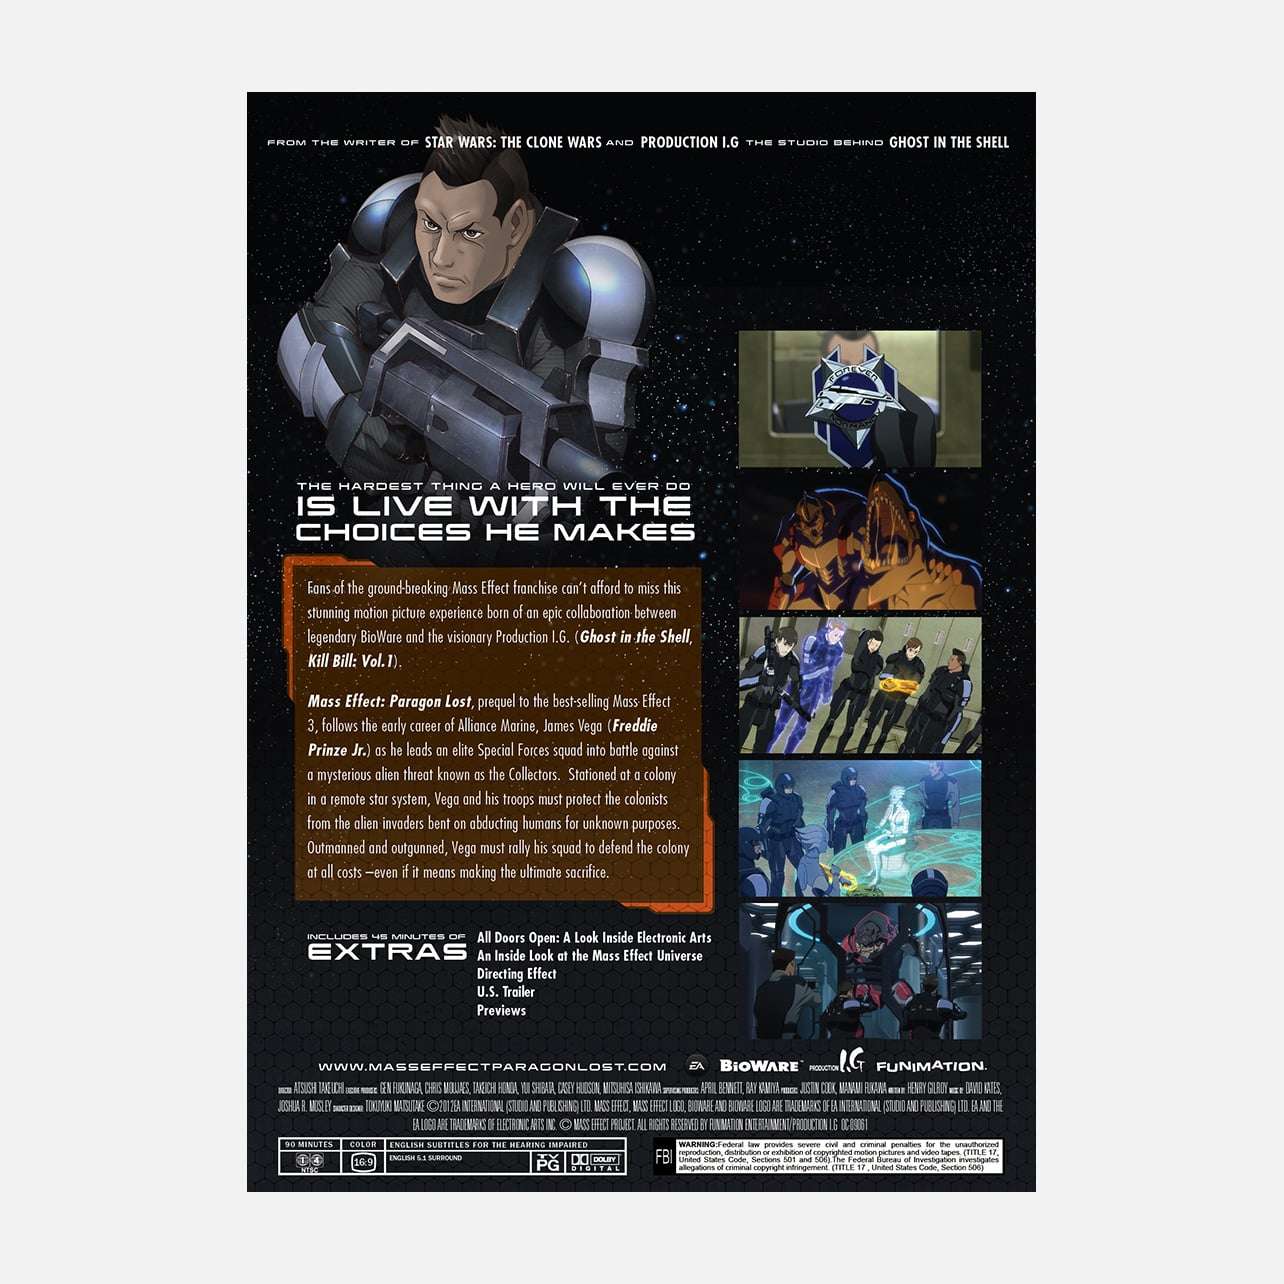  Shop Mass Effect Paragon Lost Funimation